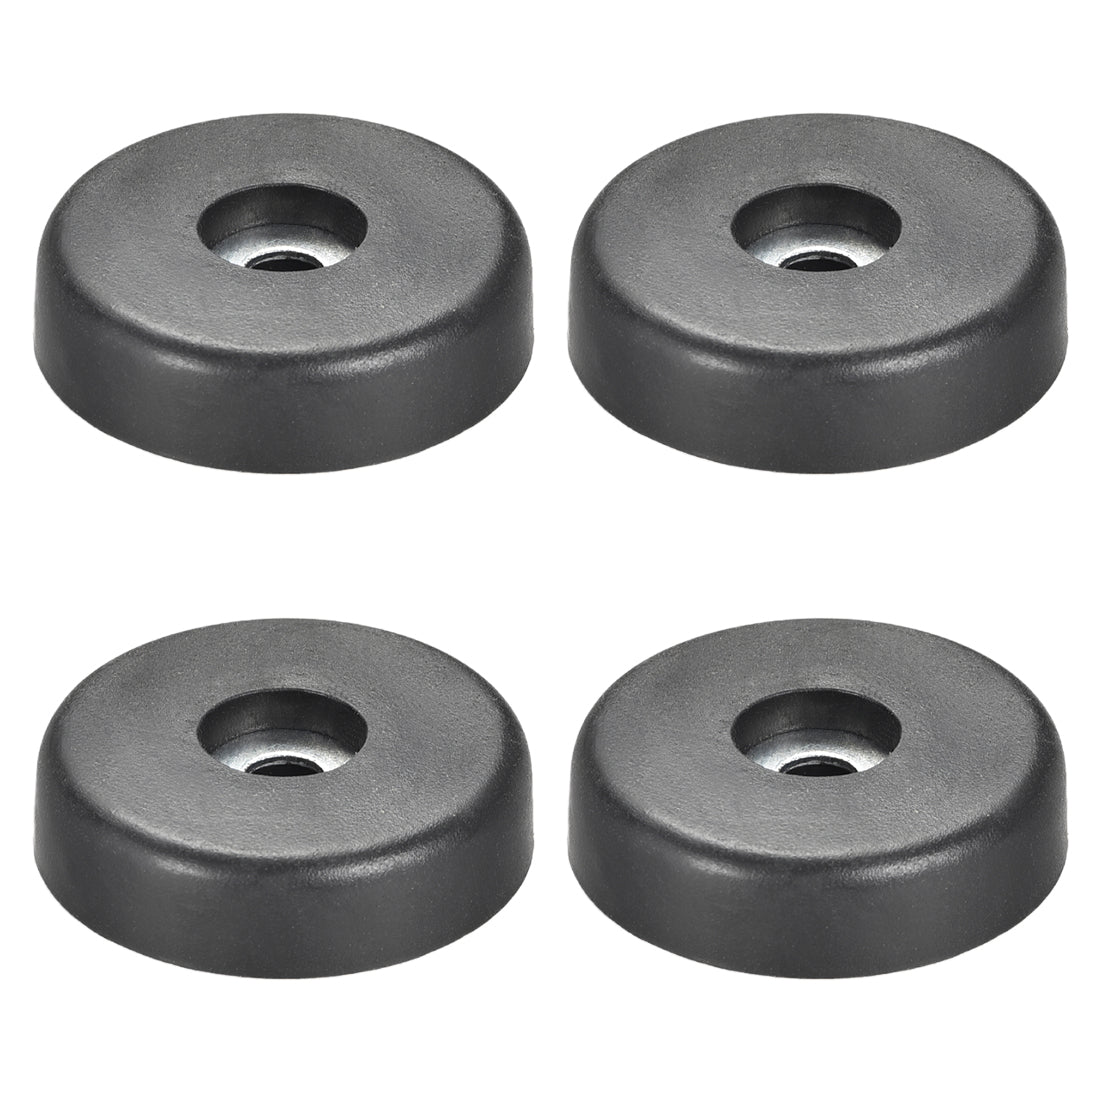 uxcell Uxcell 4 Pcs D40xH10mm Rubber Feet Anti-Vibration Base Pad Stand for Speaker Guitar Amplifier HiFi